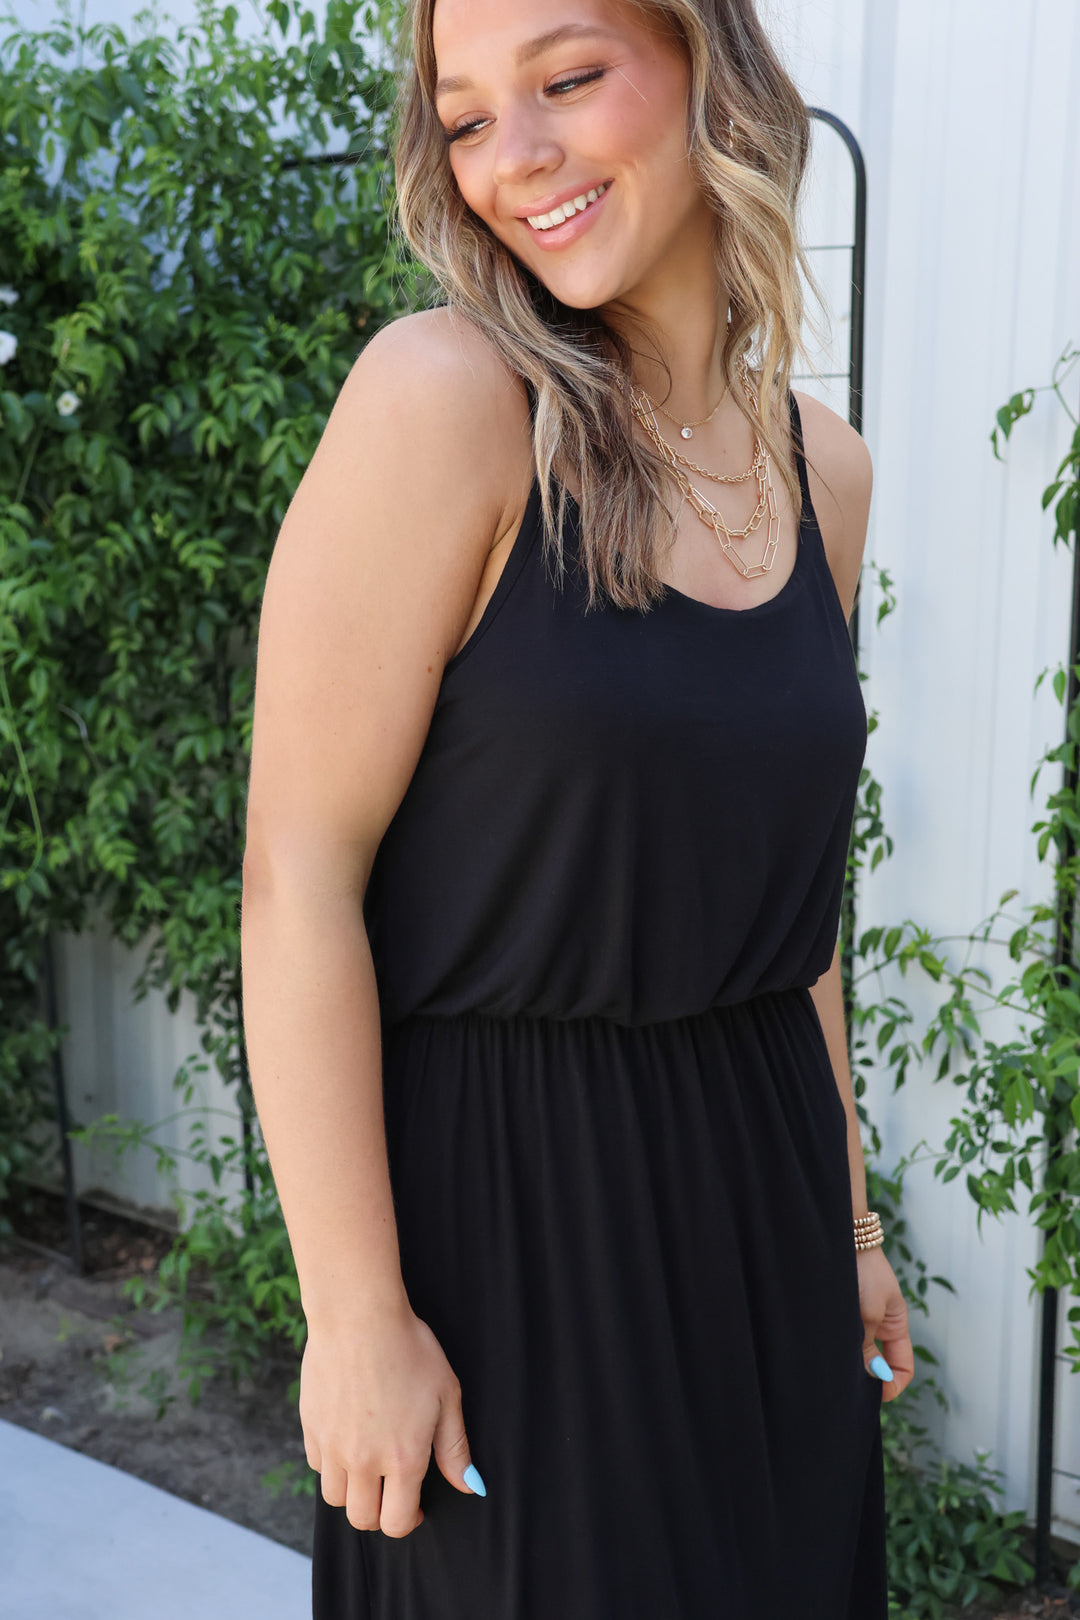 Safe Travels Maxi Dress in Black - ShopSpoiled